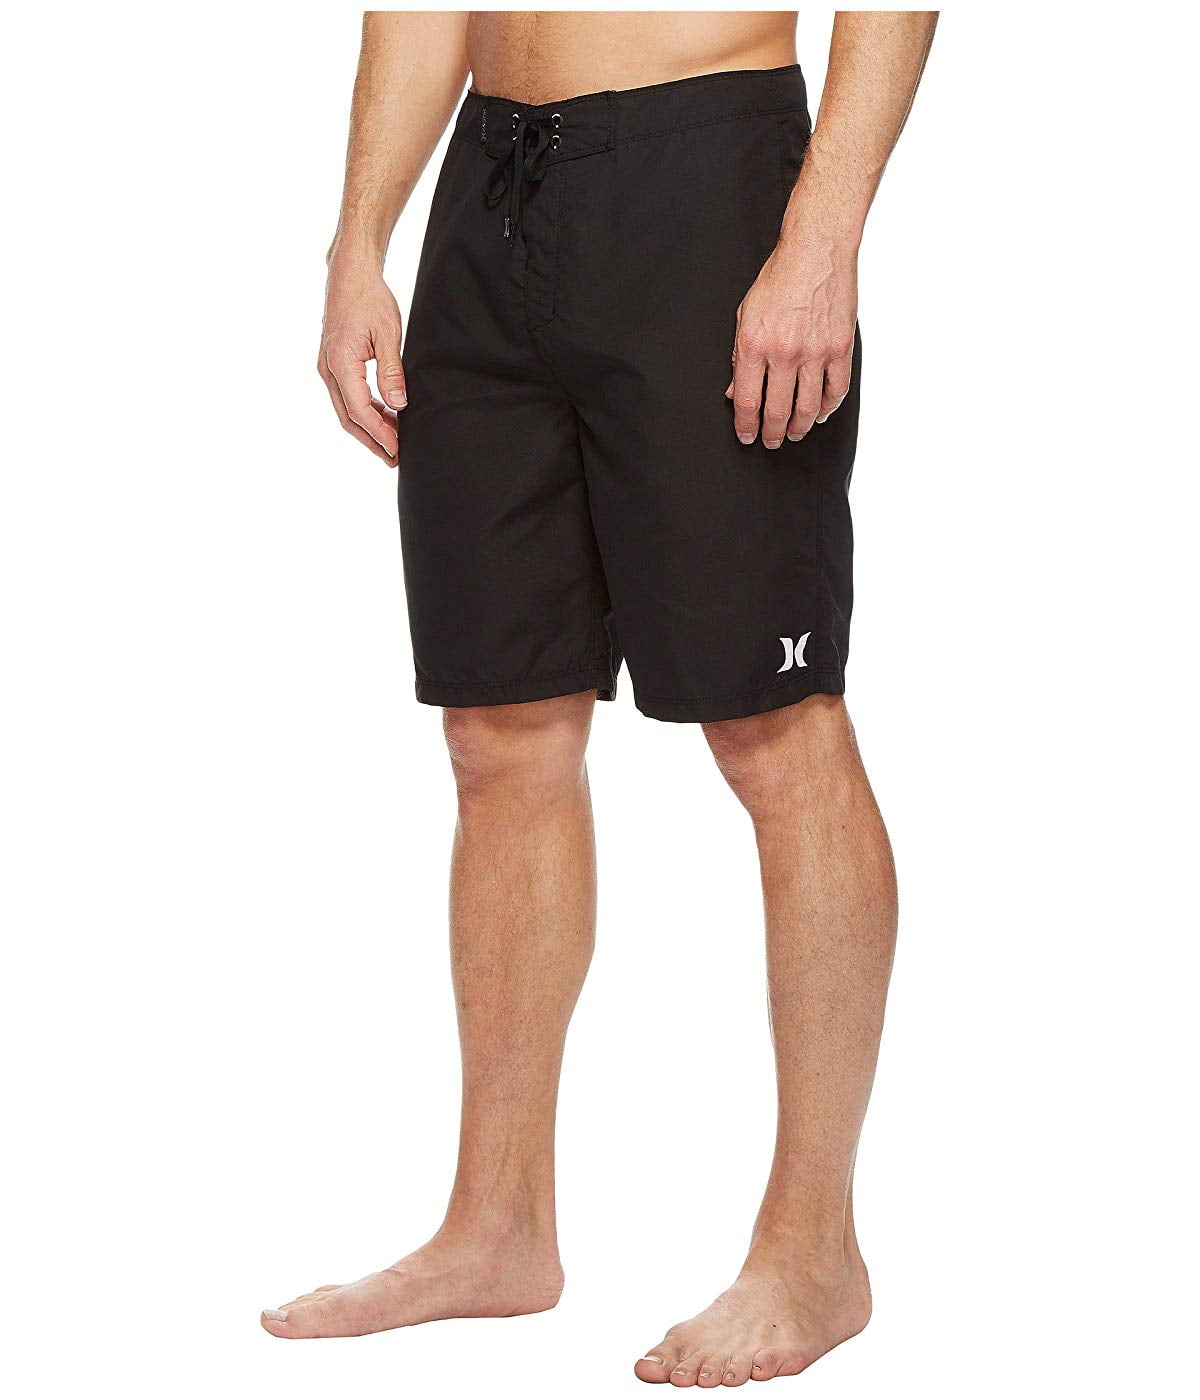 New Hurley Men's 30 32 34 36 38 One and Only 2.0 Board Shorts MBS0007850 21" blk 